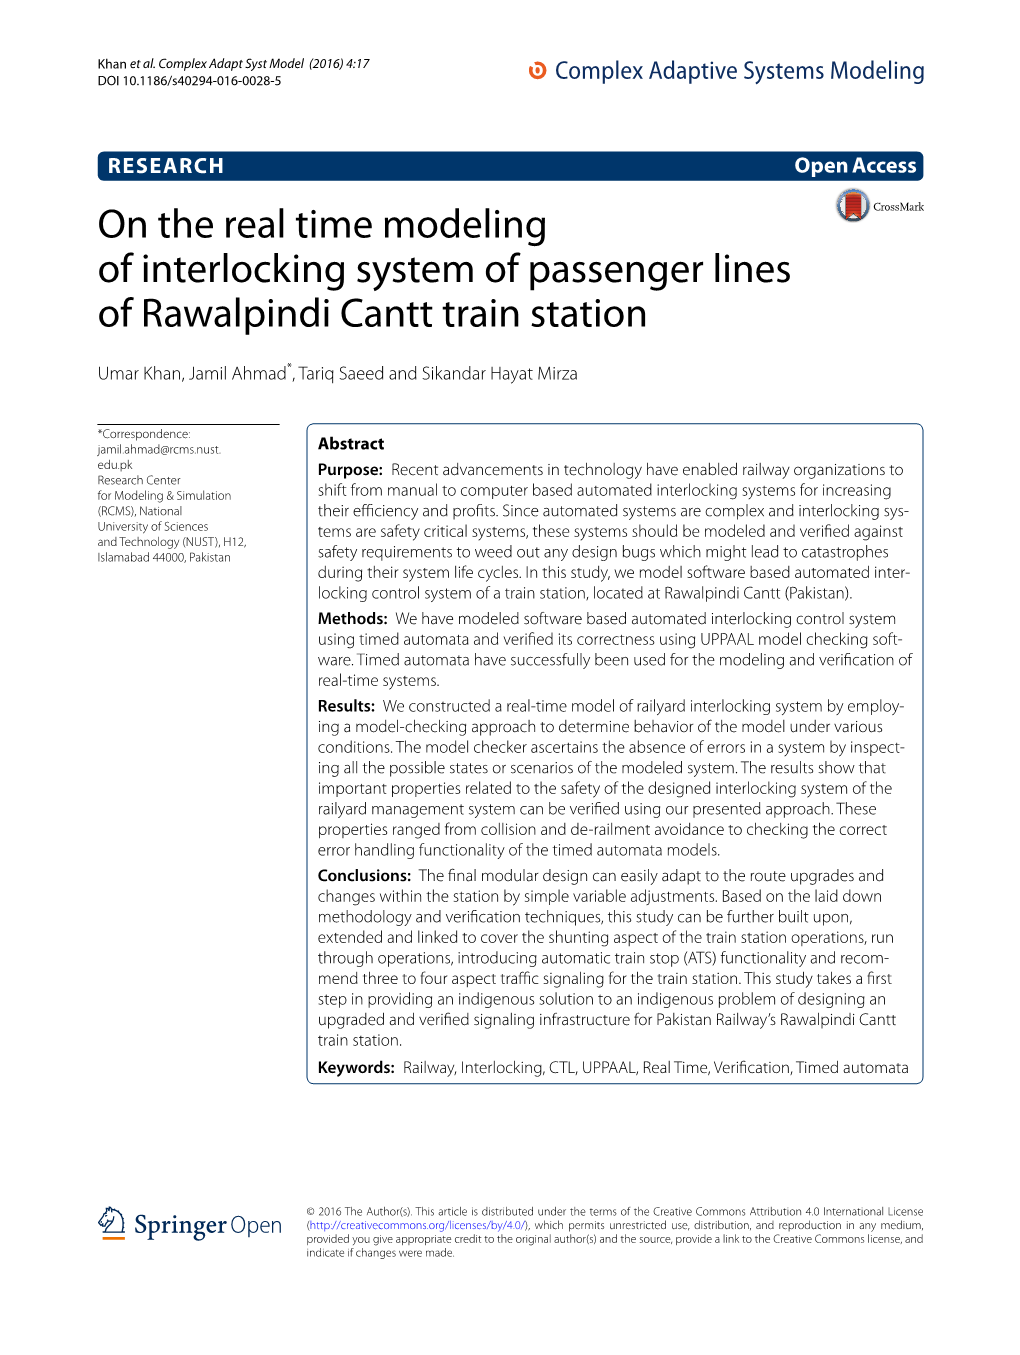 On the Real Time Modeling of Interlocking System of Passenger Lines of Rawalpindi Cantt Train Station